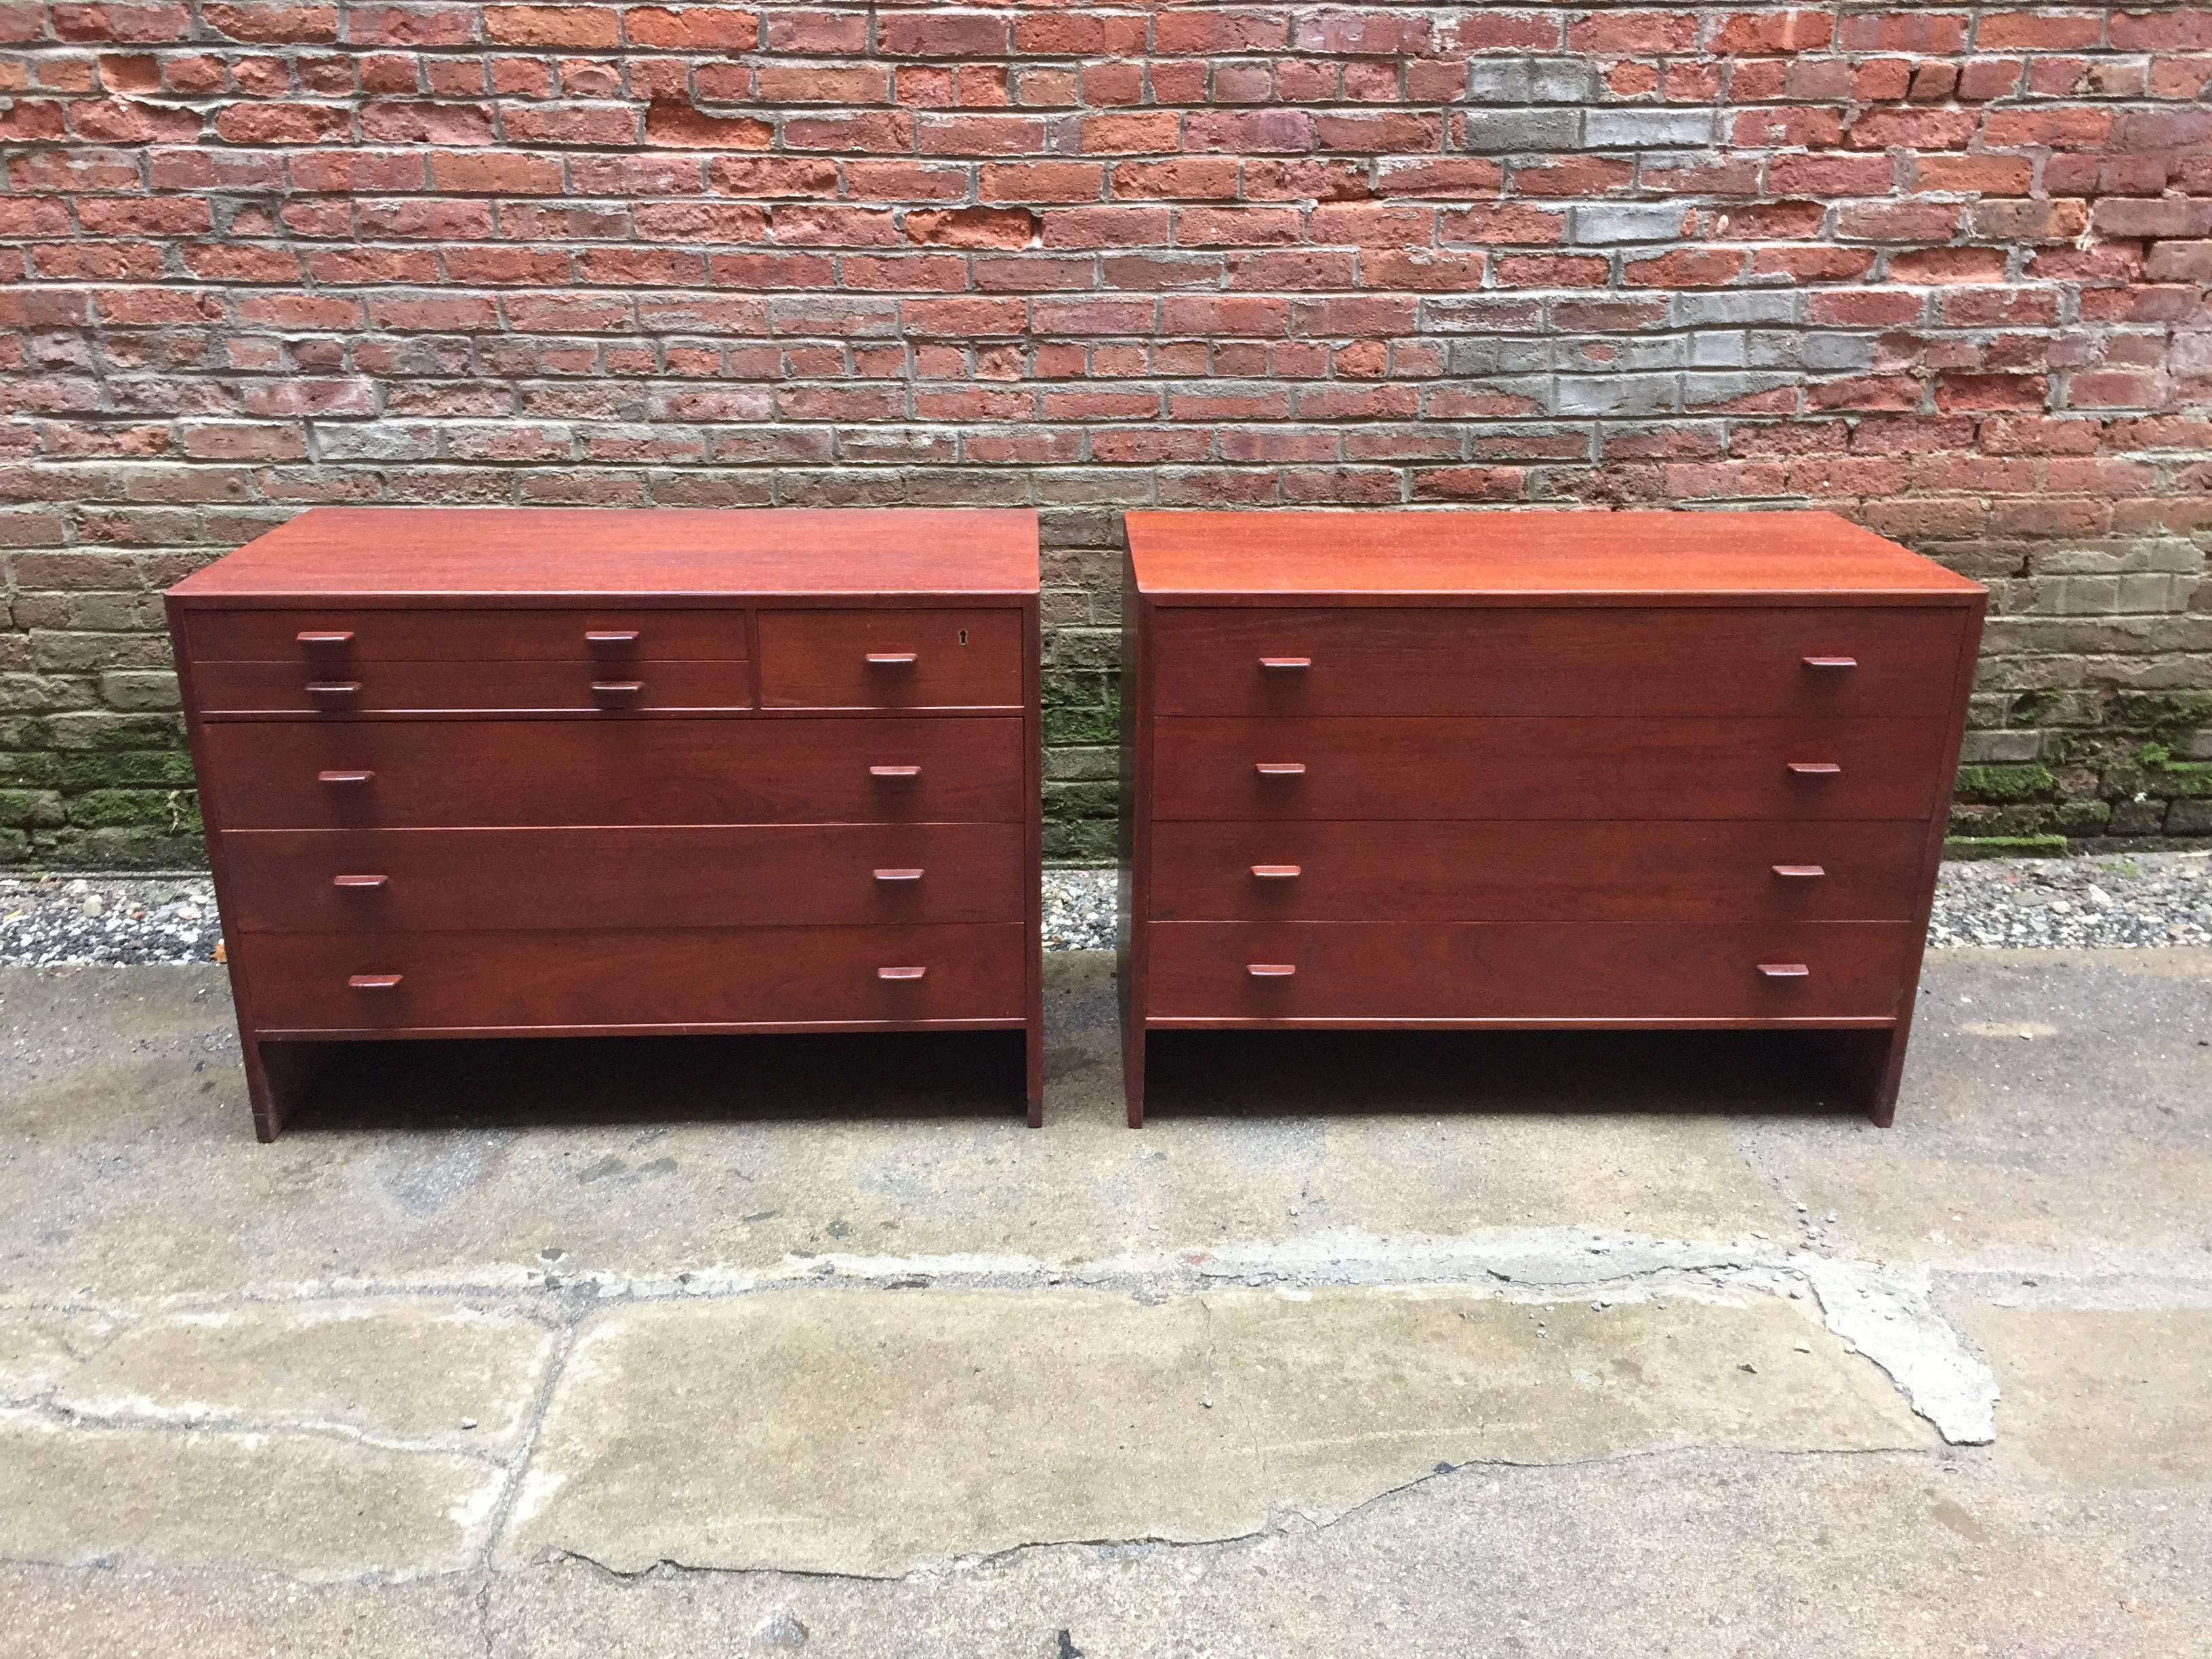 Beautiful pair of cabinets designed by Hans Wegner for Ry Mobler, Denmark. Teak veneer construction with solid teak handles. One cabinet contains six drawers with the two top drawers felt lined. It retains the original brass key, but it has been